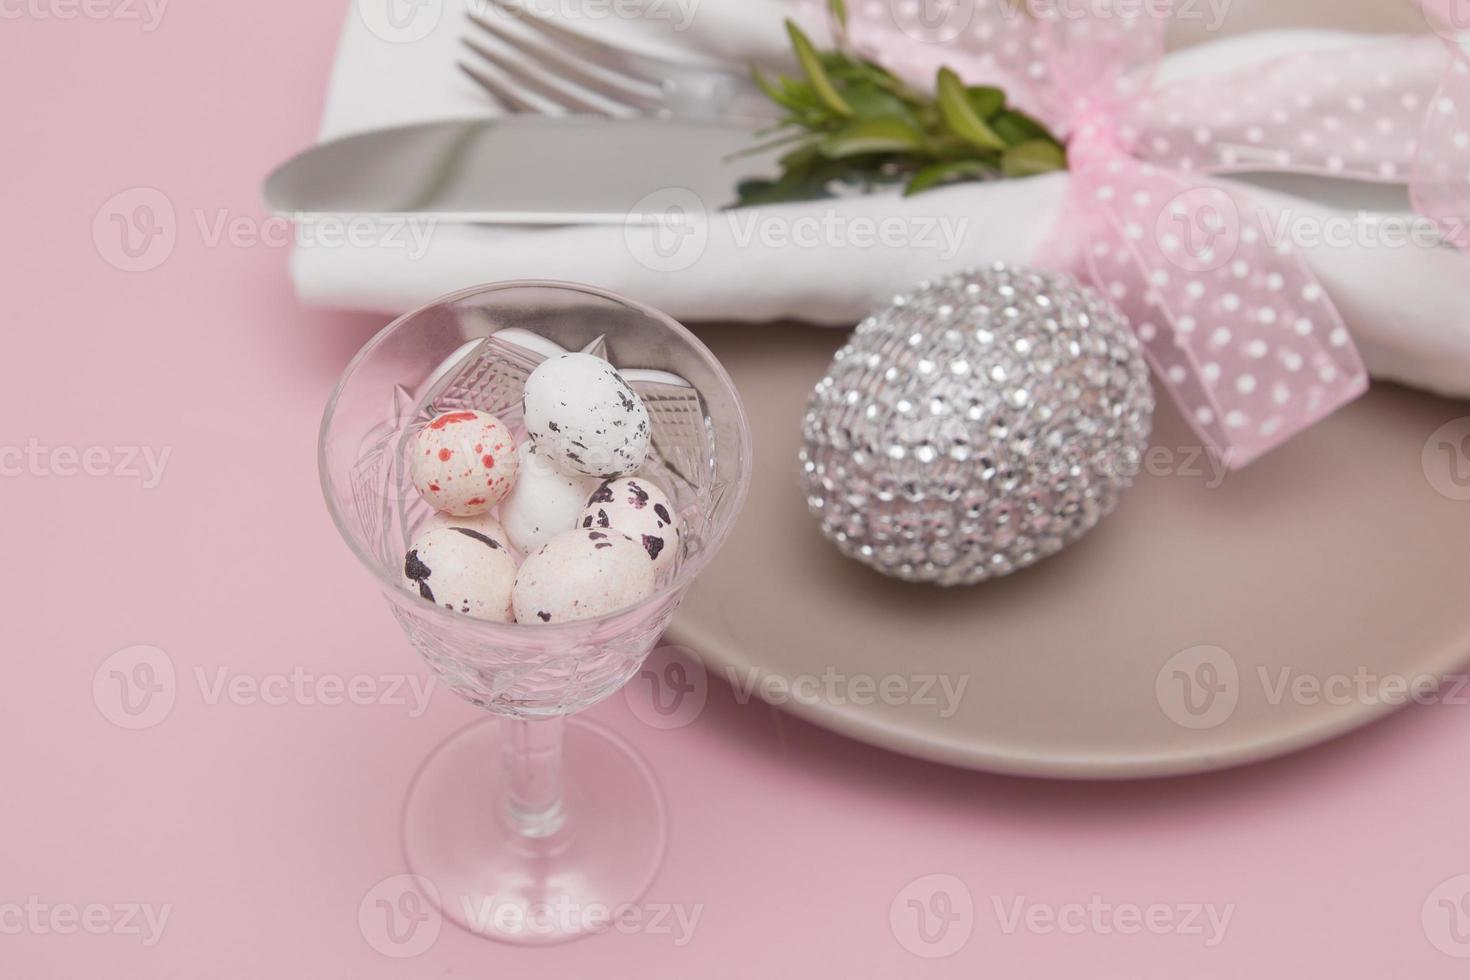 Glass with Easter eggs on the background of plates and cutlery. Variative focus photo